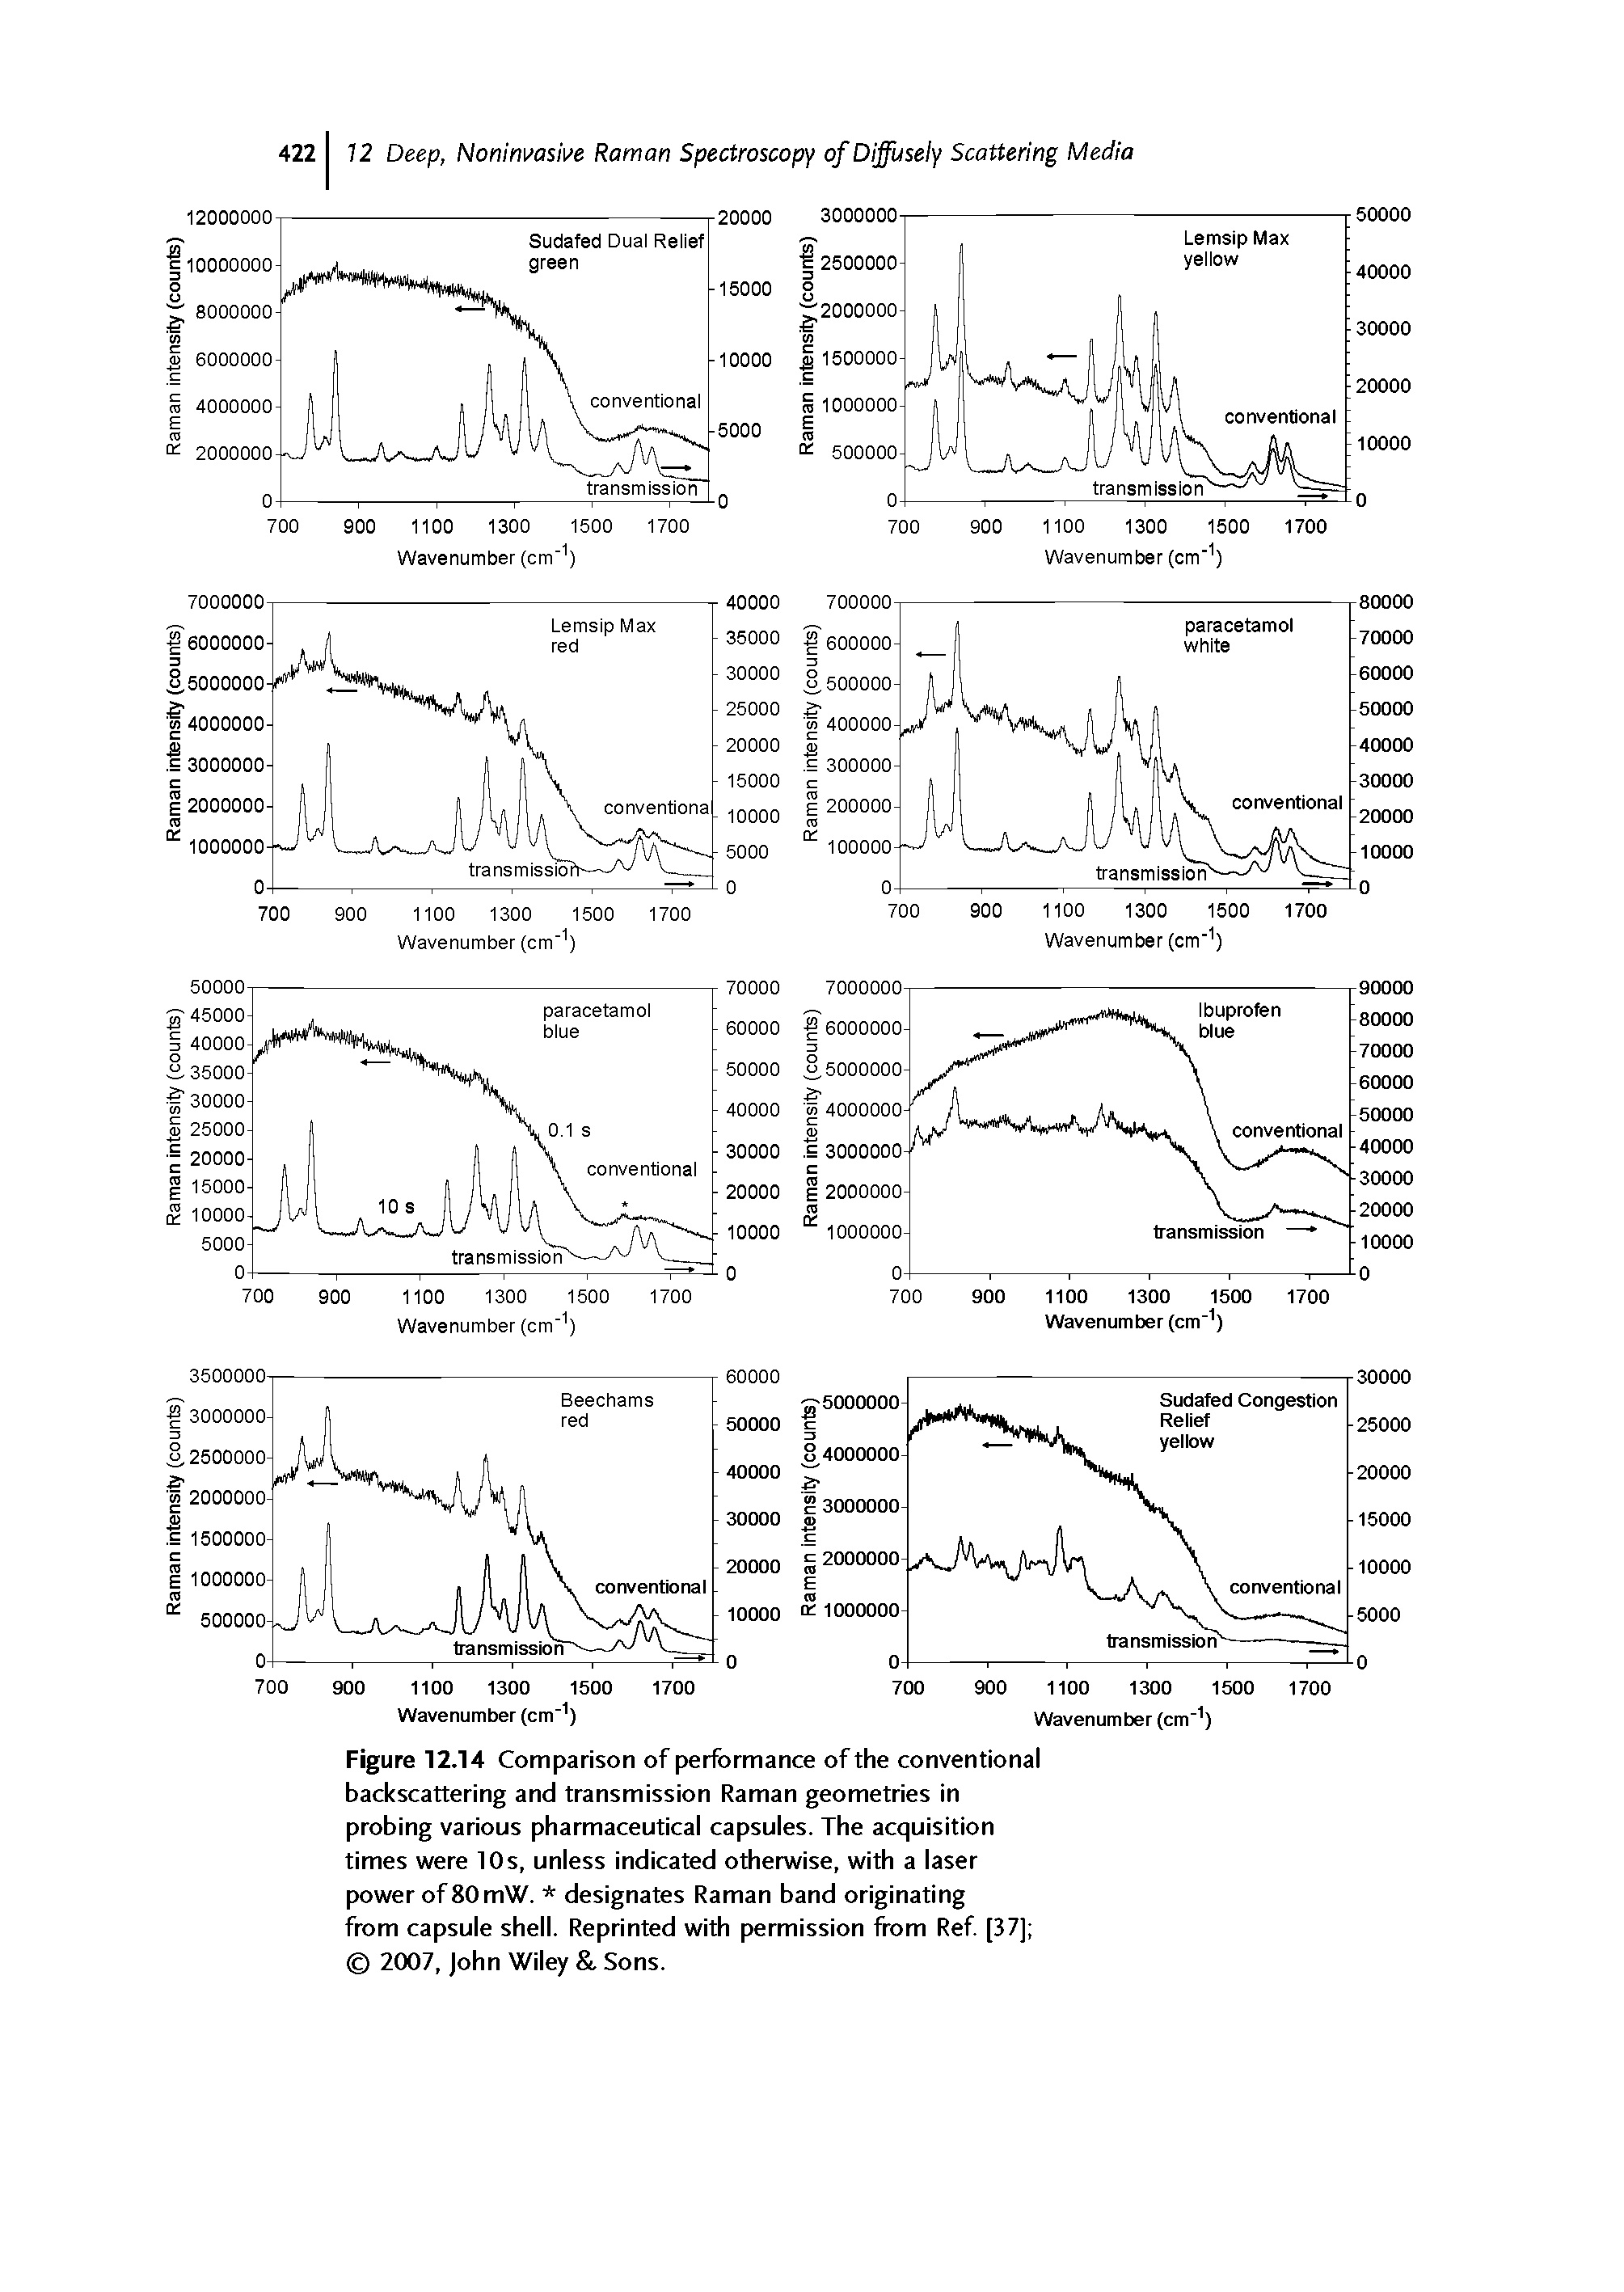 Figure 12.14 Comparison of performance of the conventional backscattering and transmission Raman geometries in probing various pharmaceutical capsules. The acquisition times were 10 s, unless indicated otherwise, with a laser power of 80mW. designates Raman band originating from capsule shell. Reprinted with permission from Ref [37] 2007, John Wiley Sons.